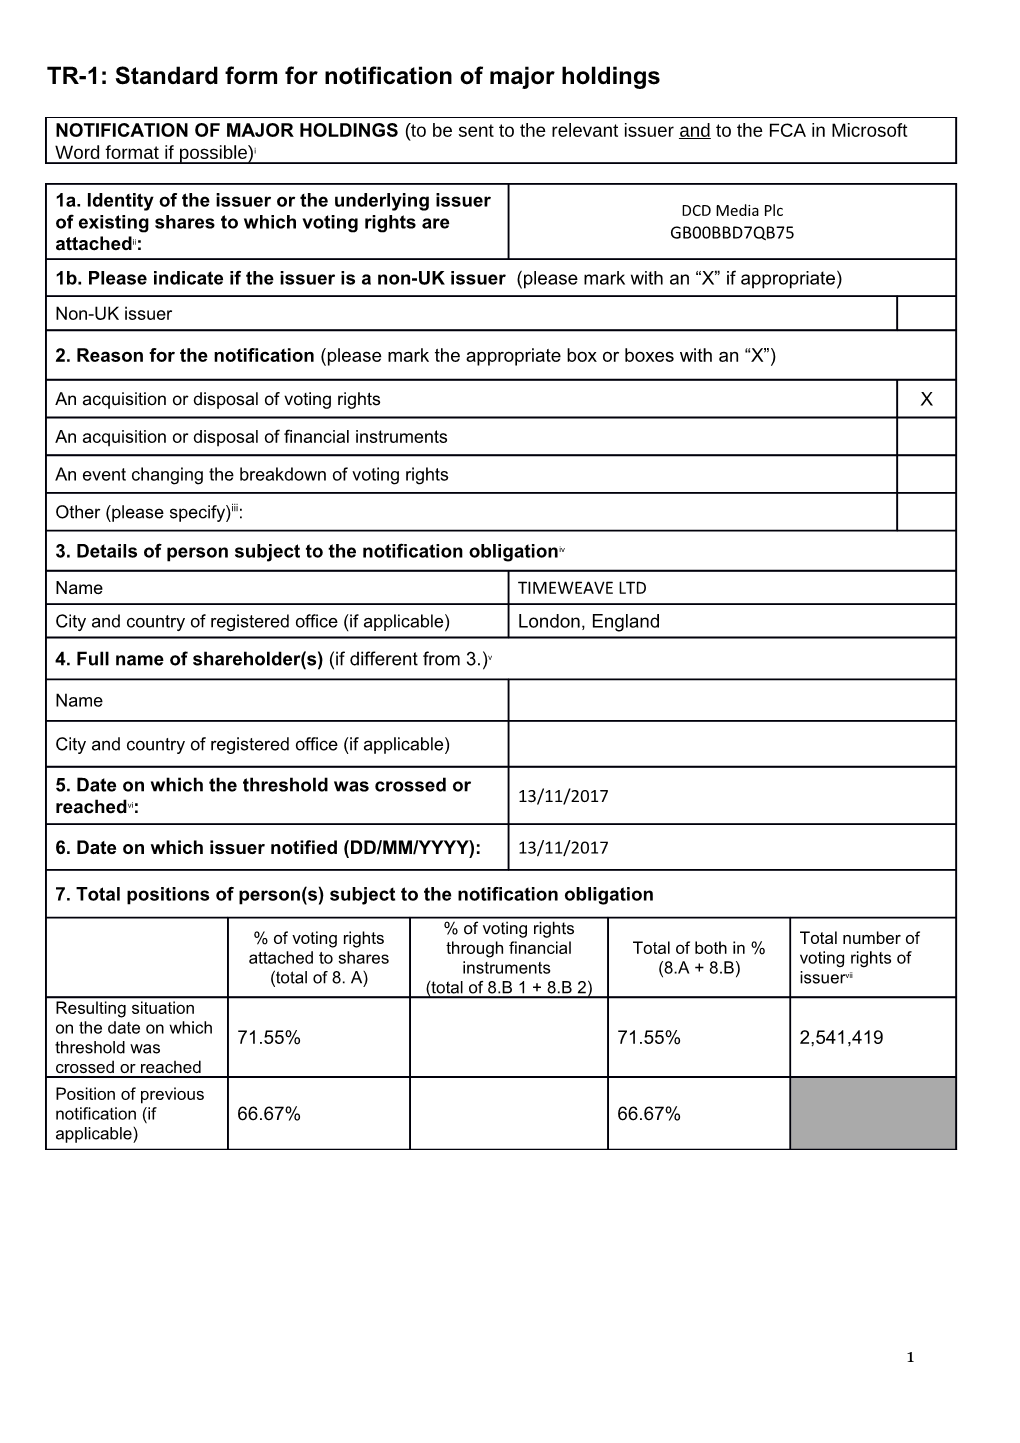 TR-1: Standard Form for Notification of Major Holdings